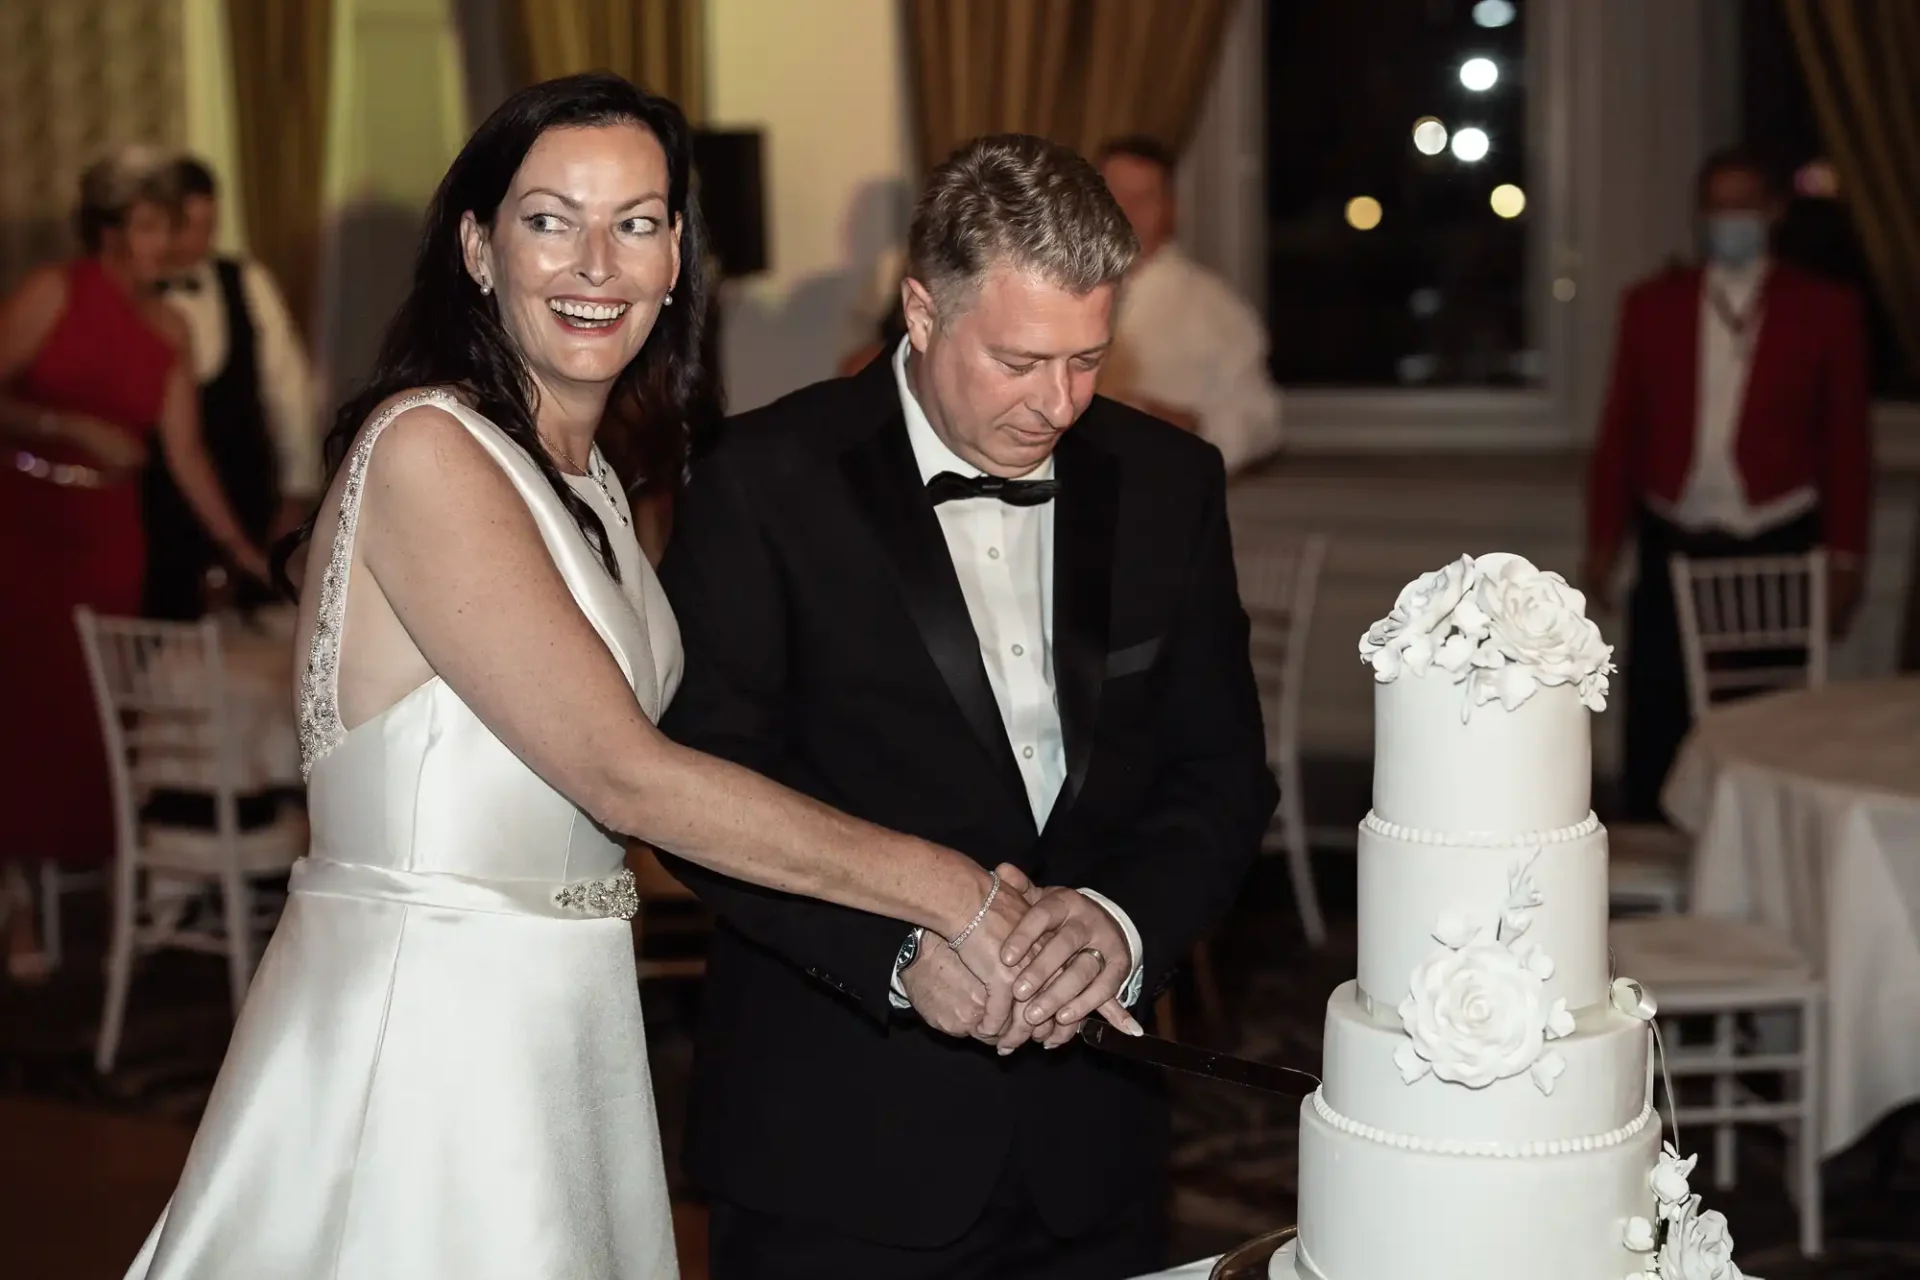 A couple in formal attire cutting a tall white wedding cake adorned with floral decorations.